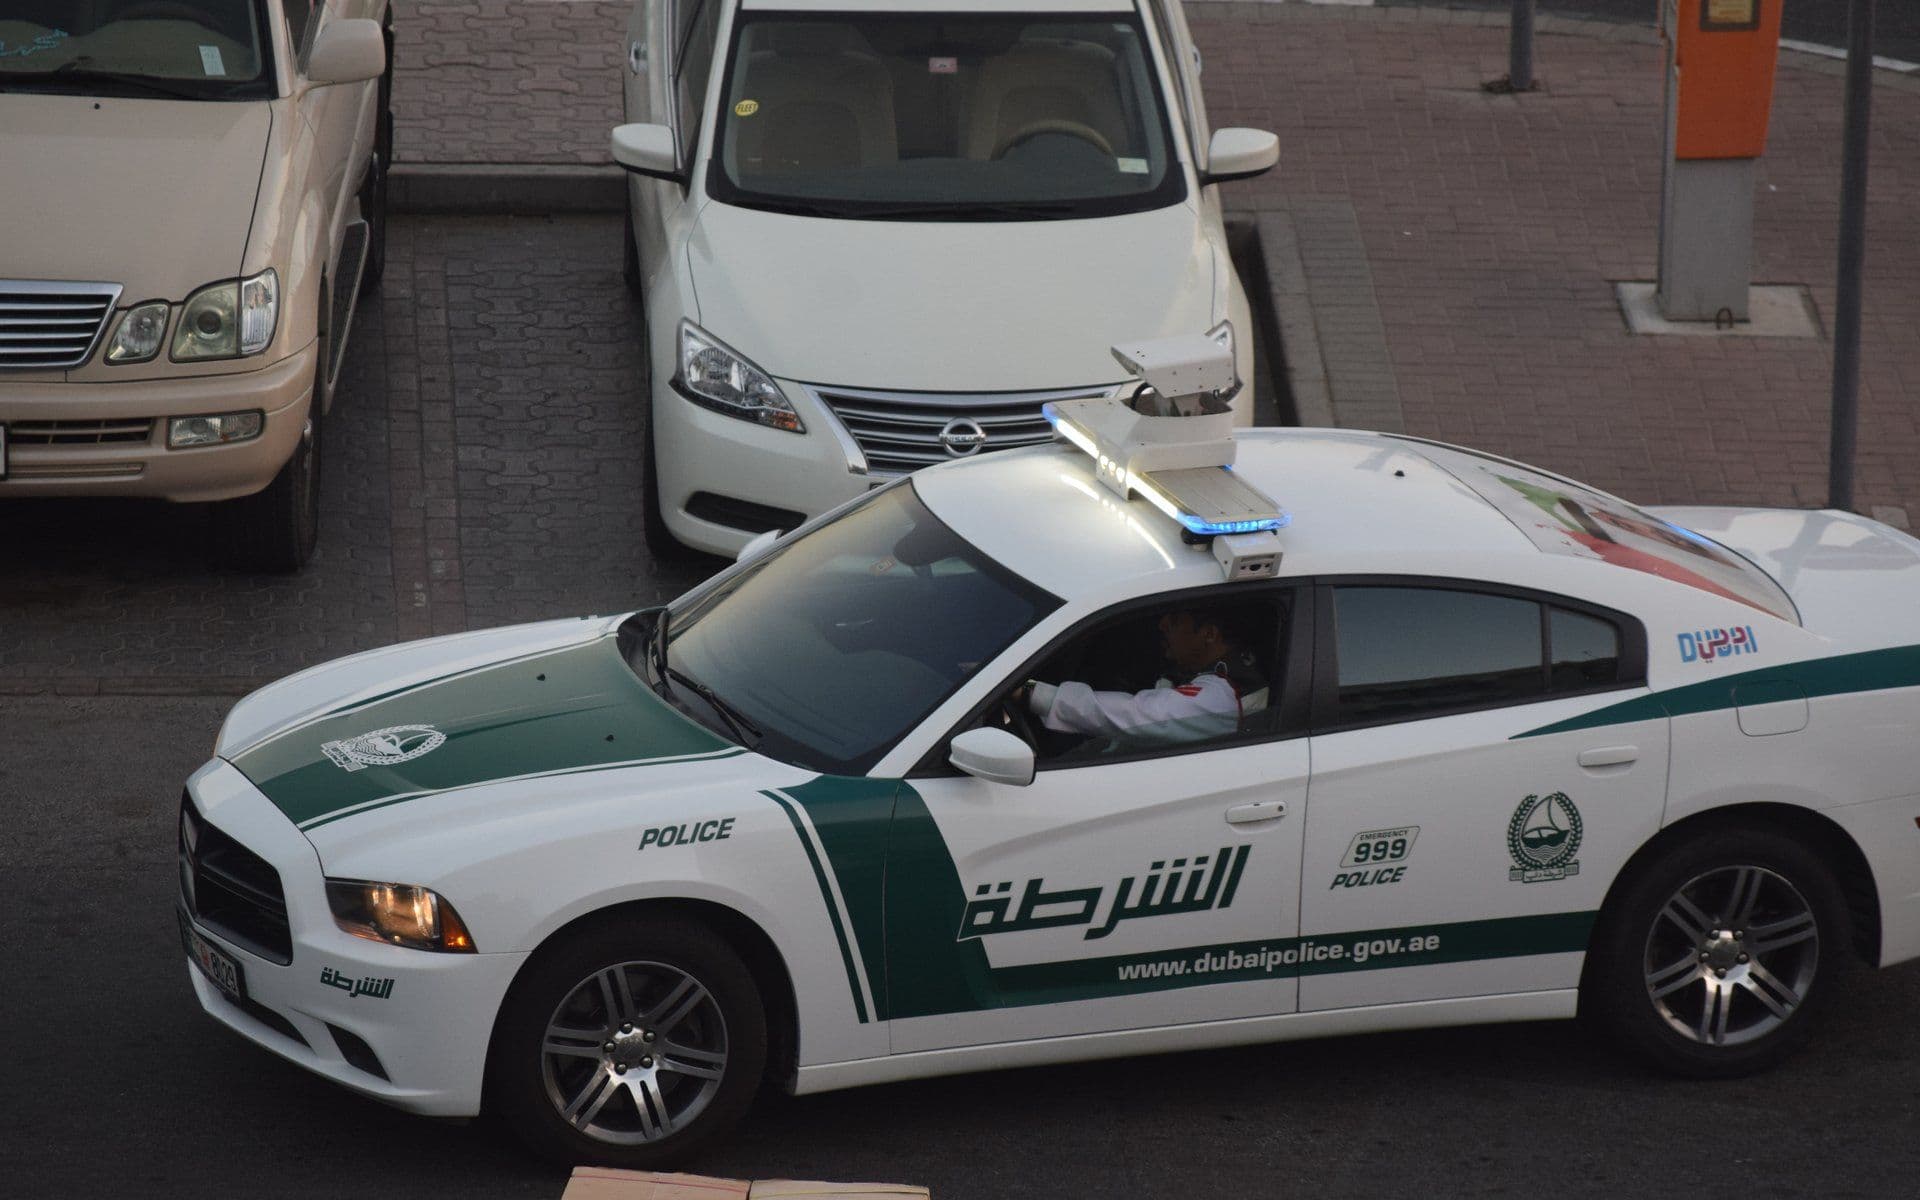 Dubai Police to Present its New NFT Collection at GITEX 2022